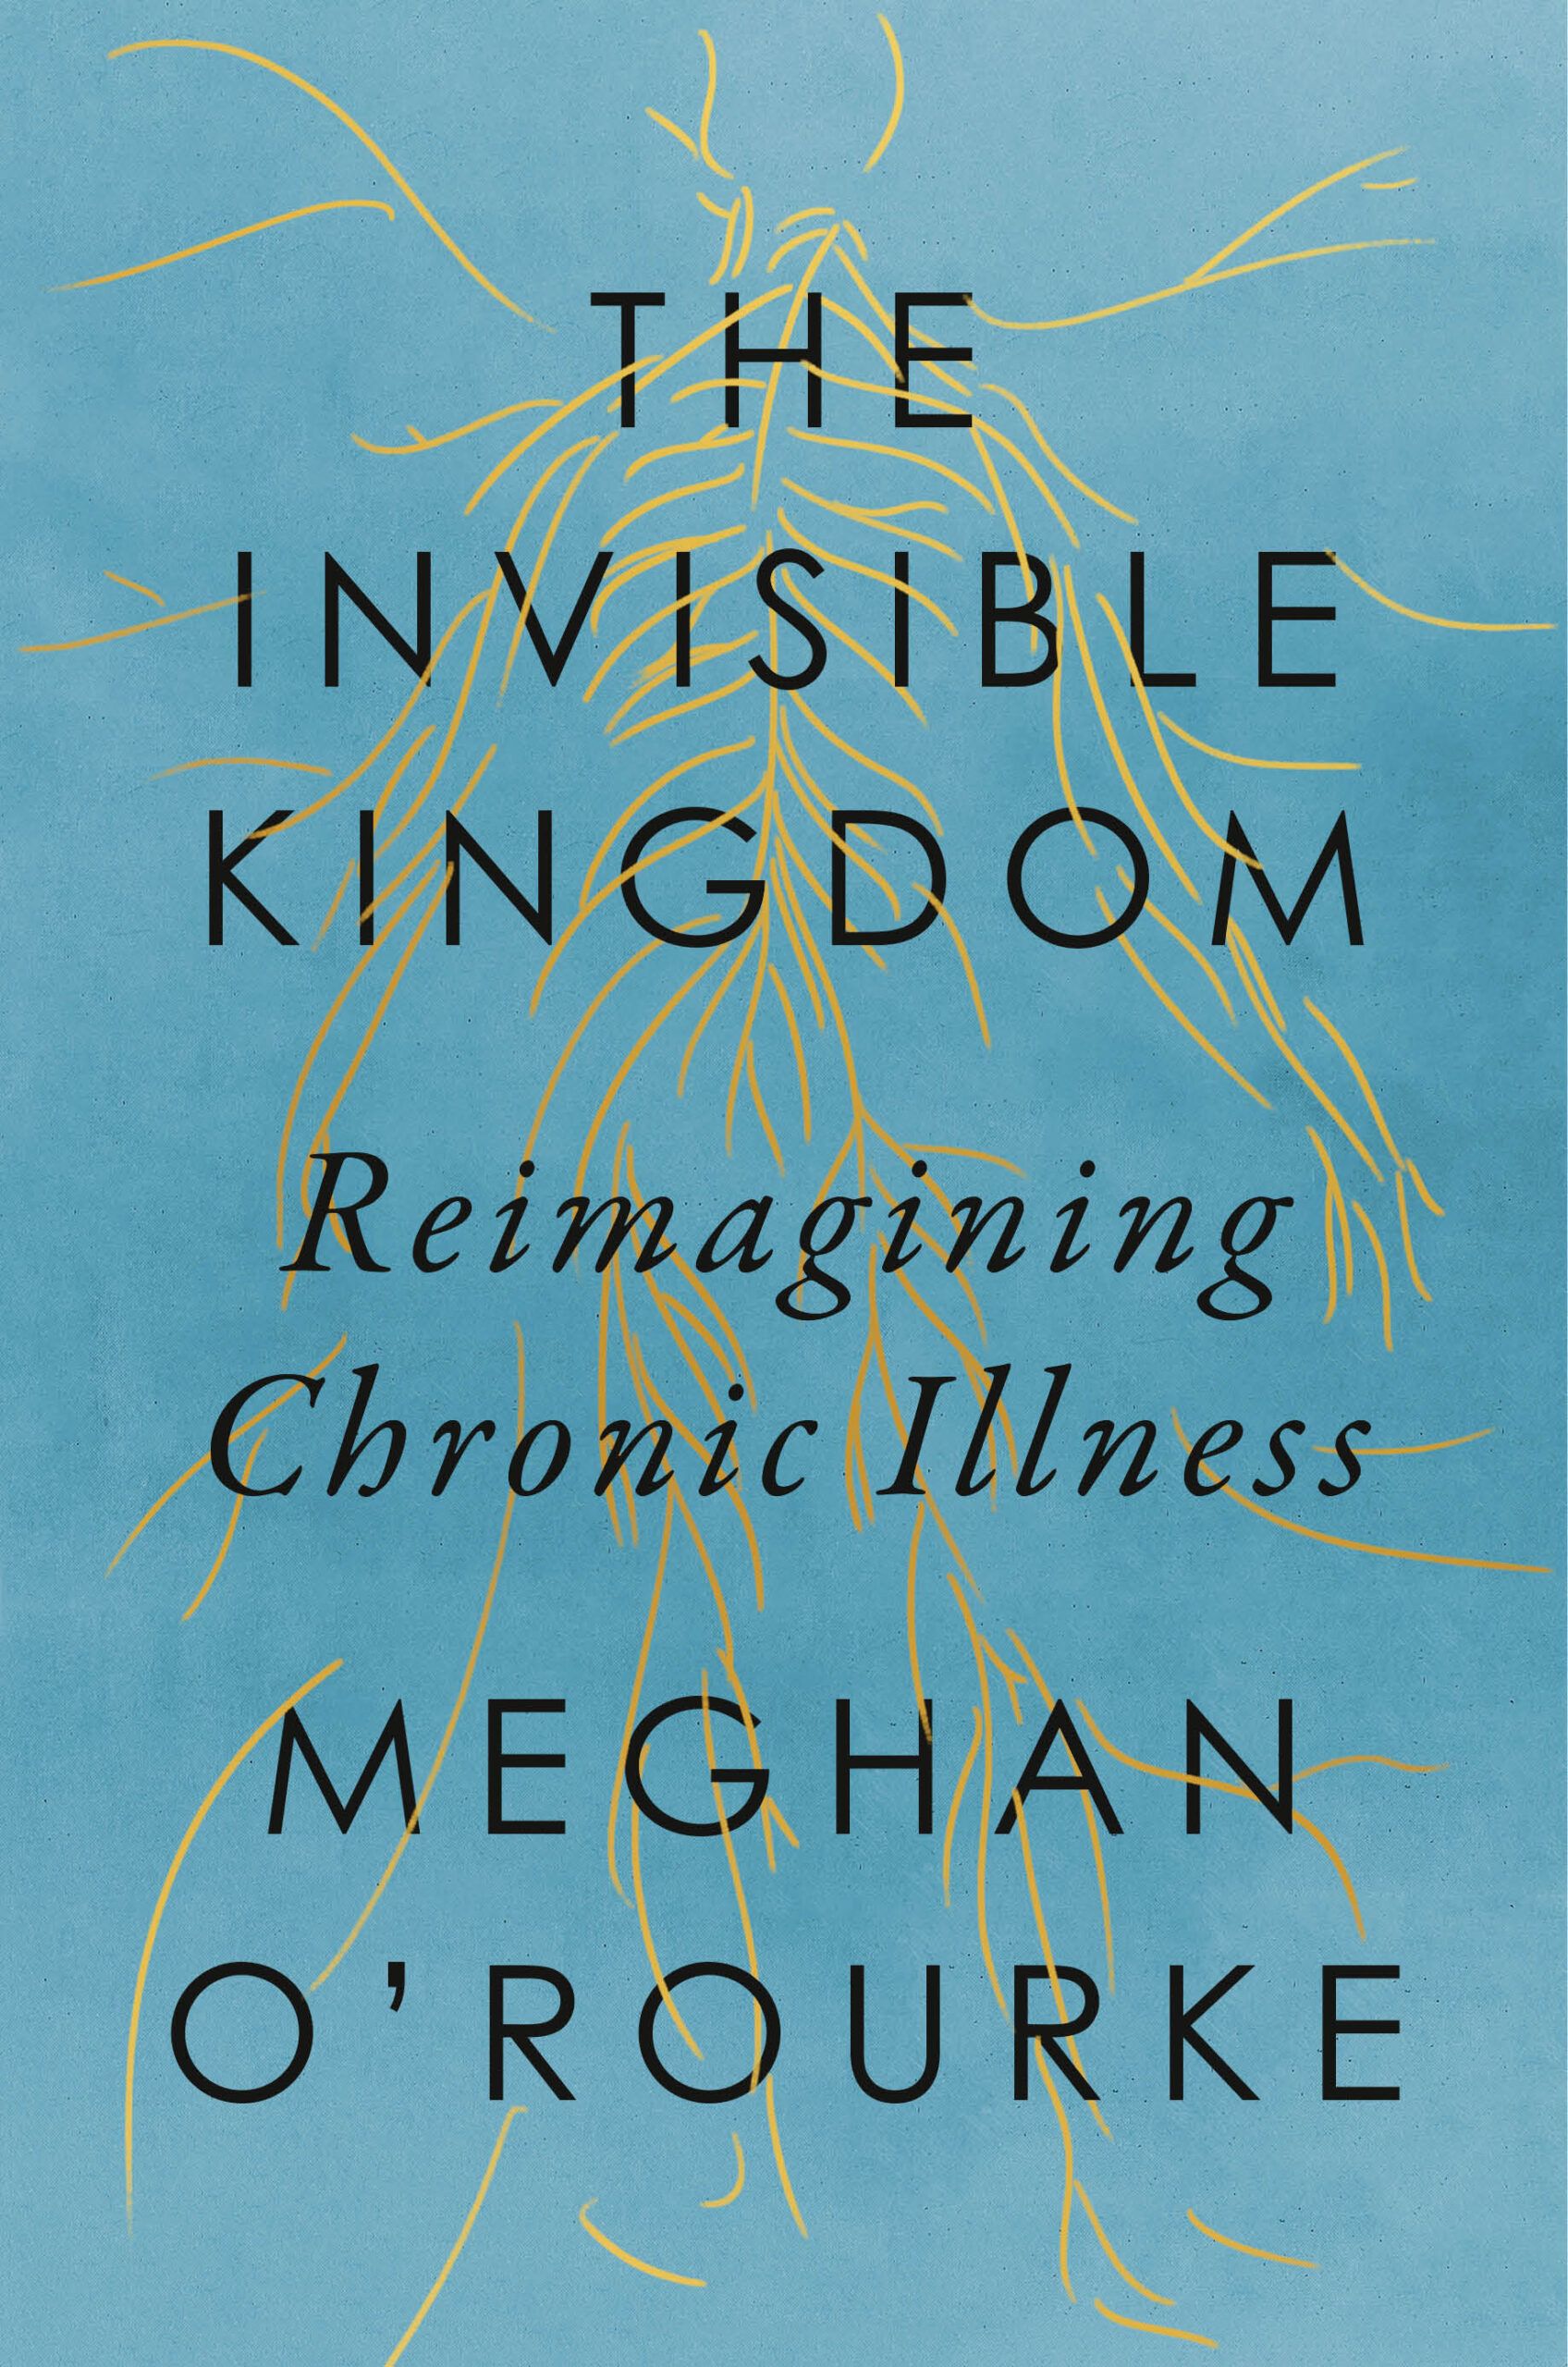 The Invisible Kingdom by Meghan O'Rourke book cover